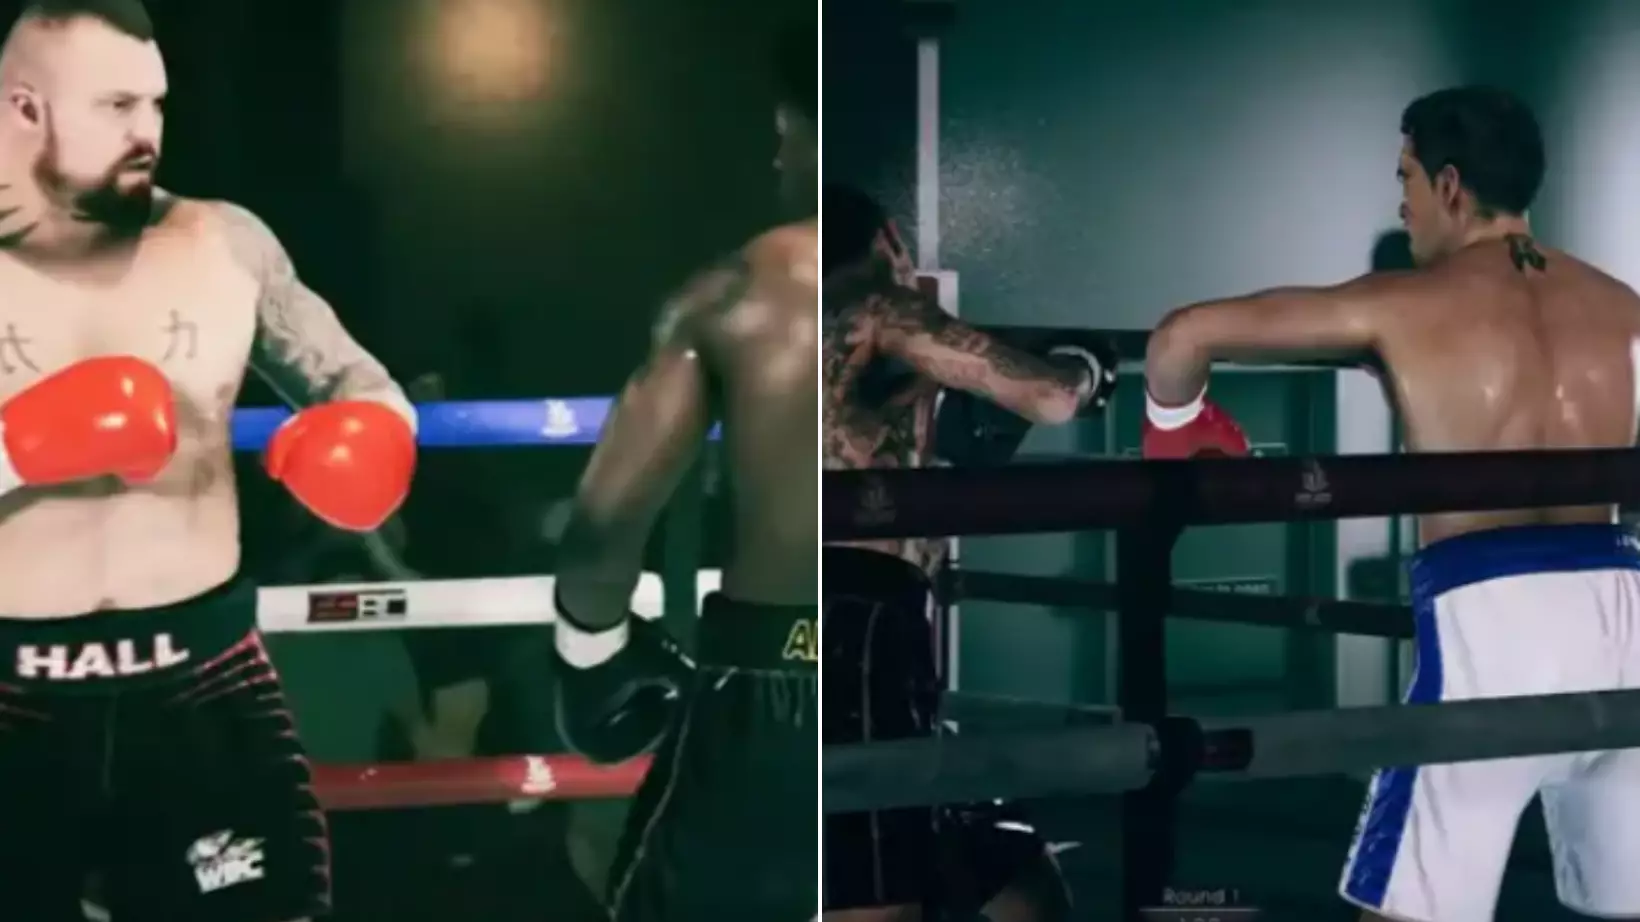 A Stunning First Look At The New Boxing Game Shows It Could Be The Next 'Fight Night'